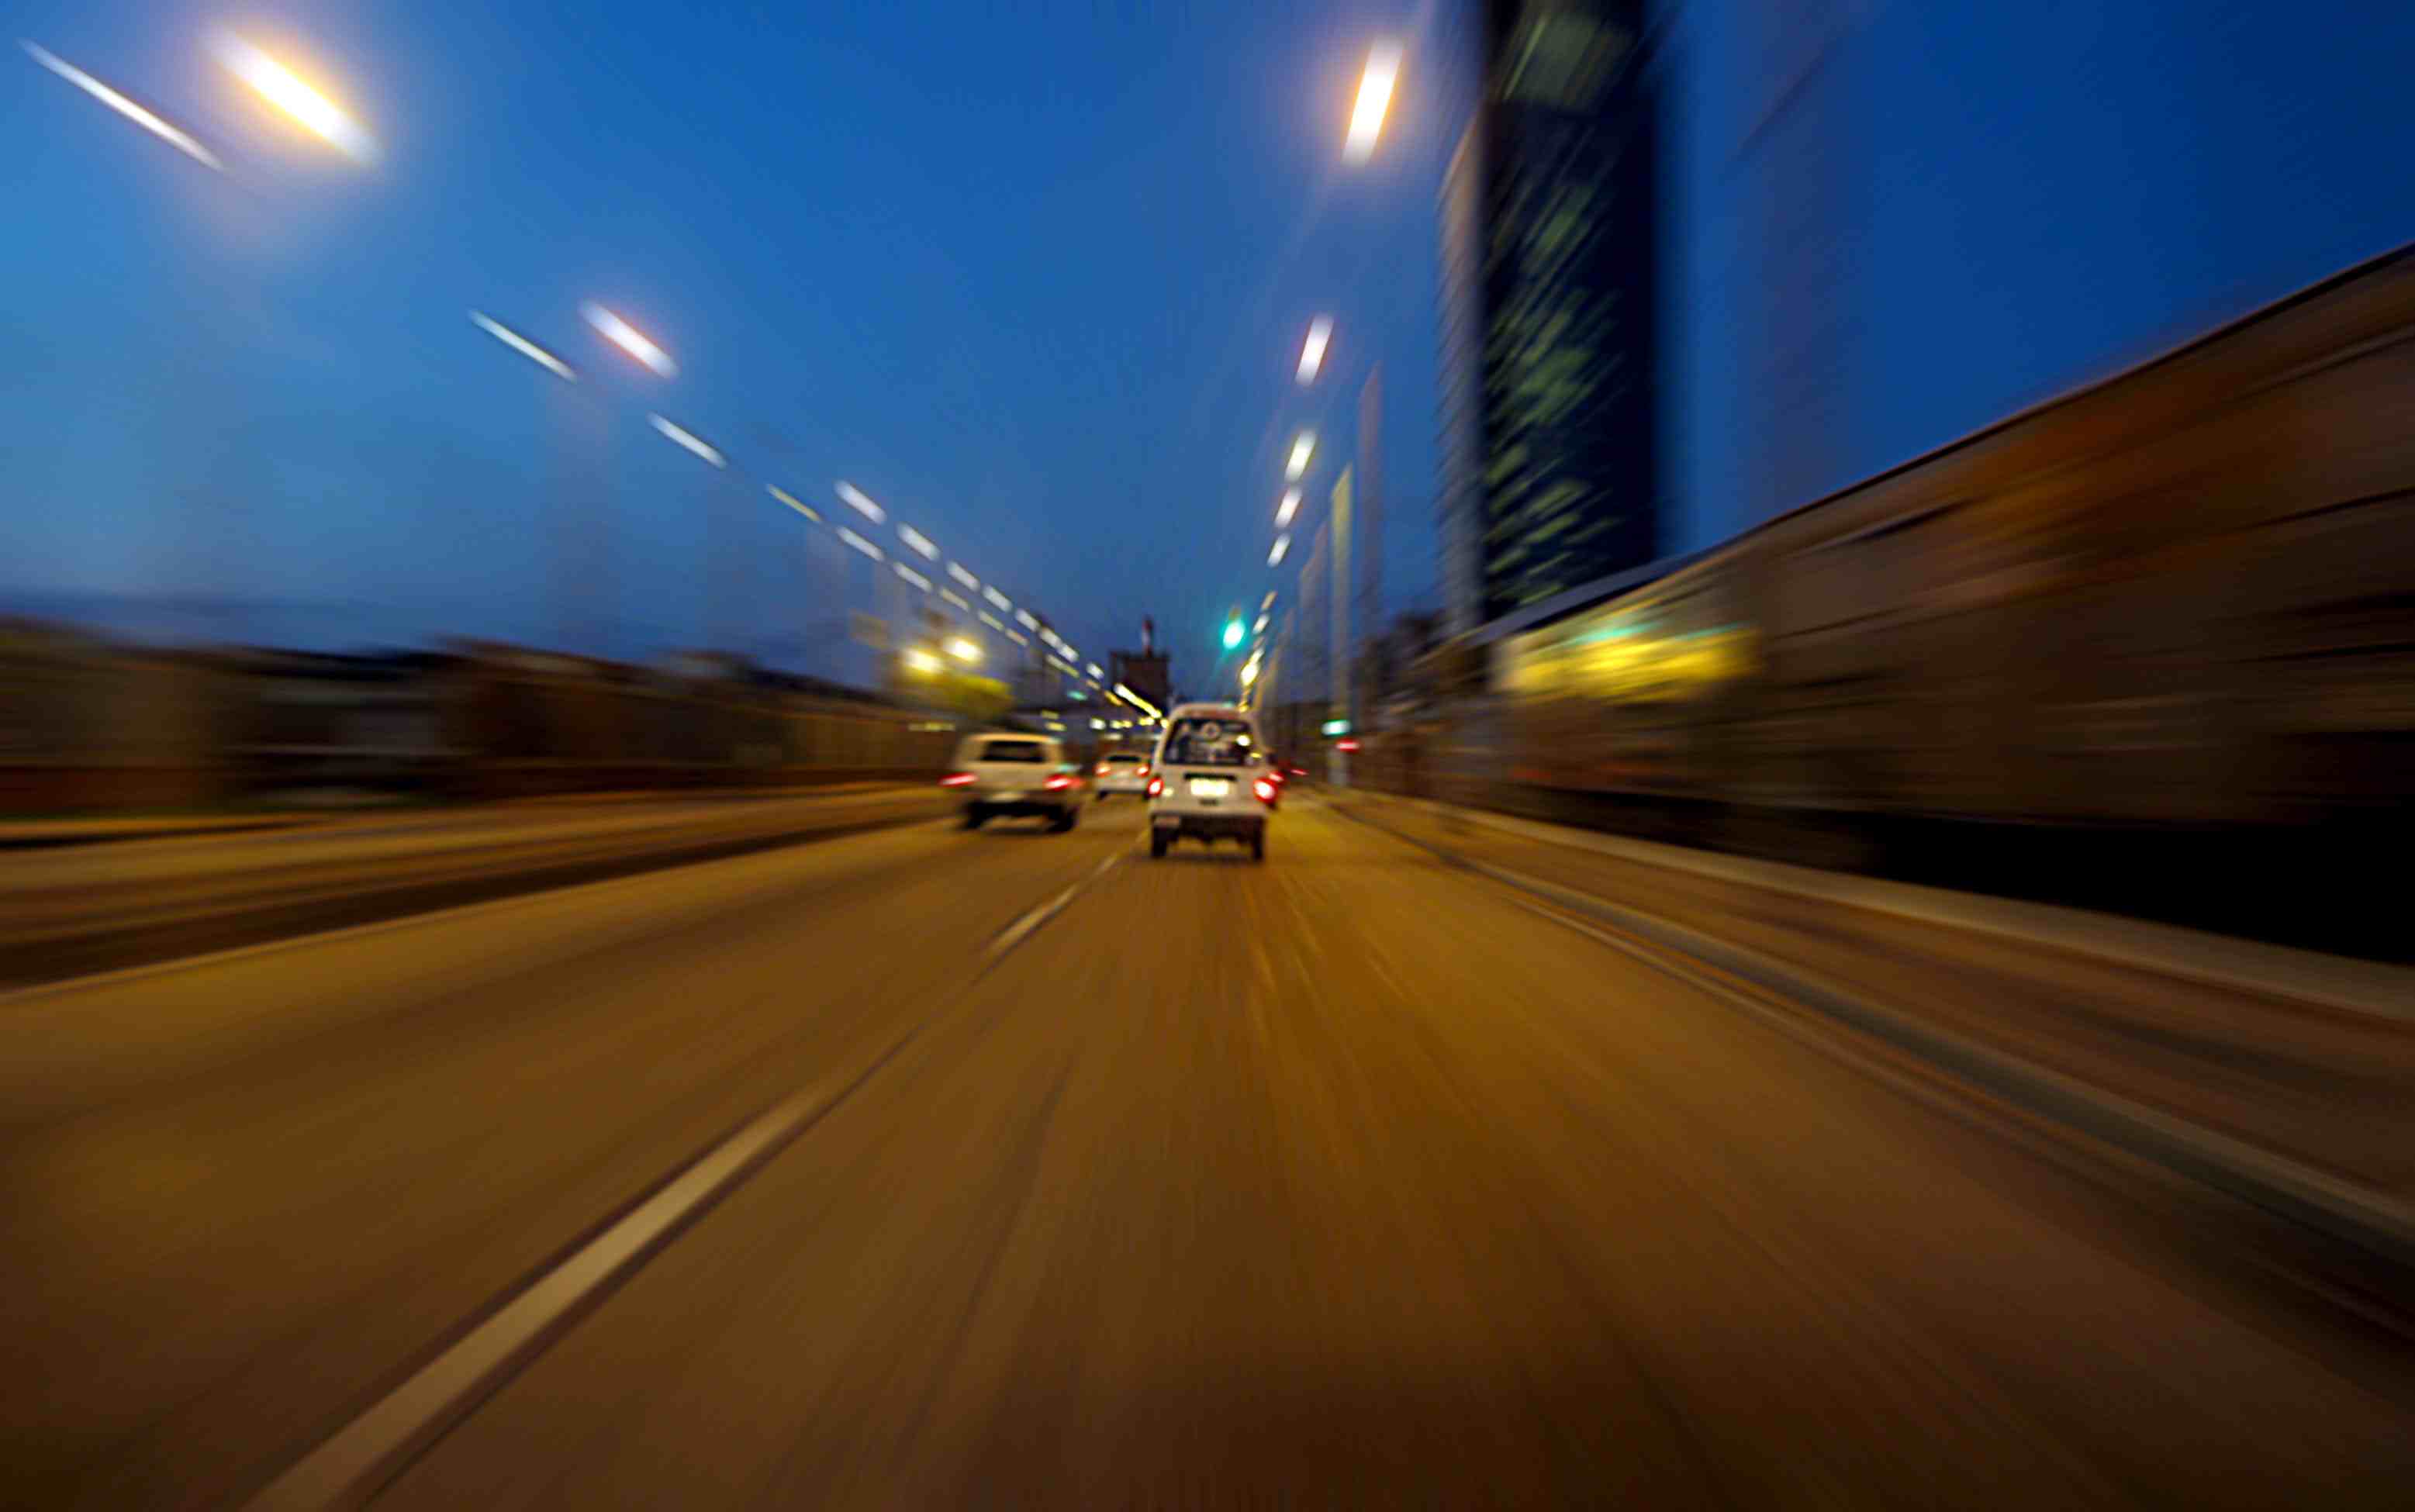 Speeding increases the risk of an accident and makes a crash more severe if it does occur.